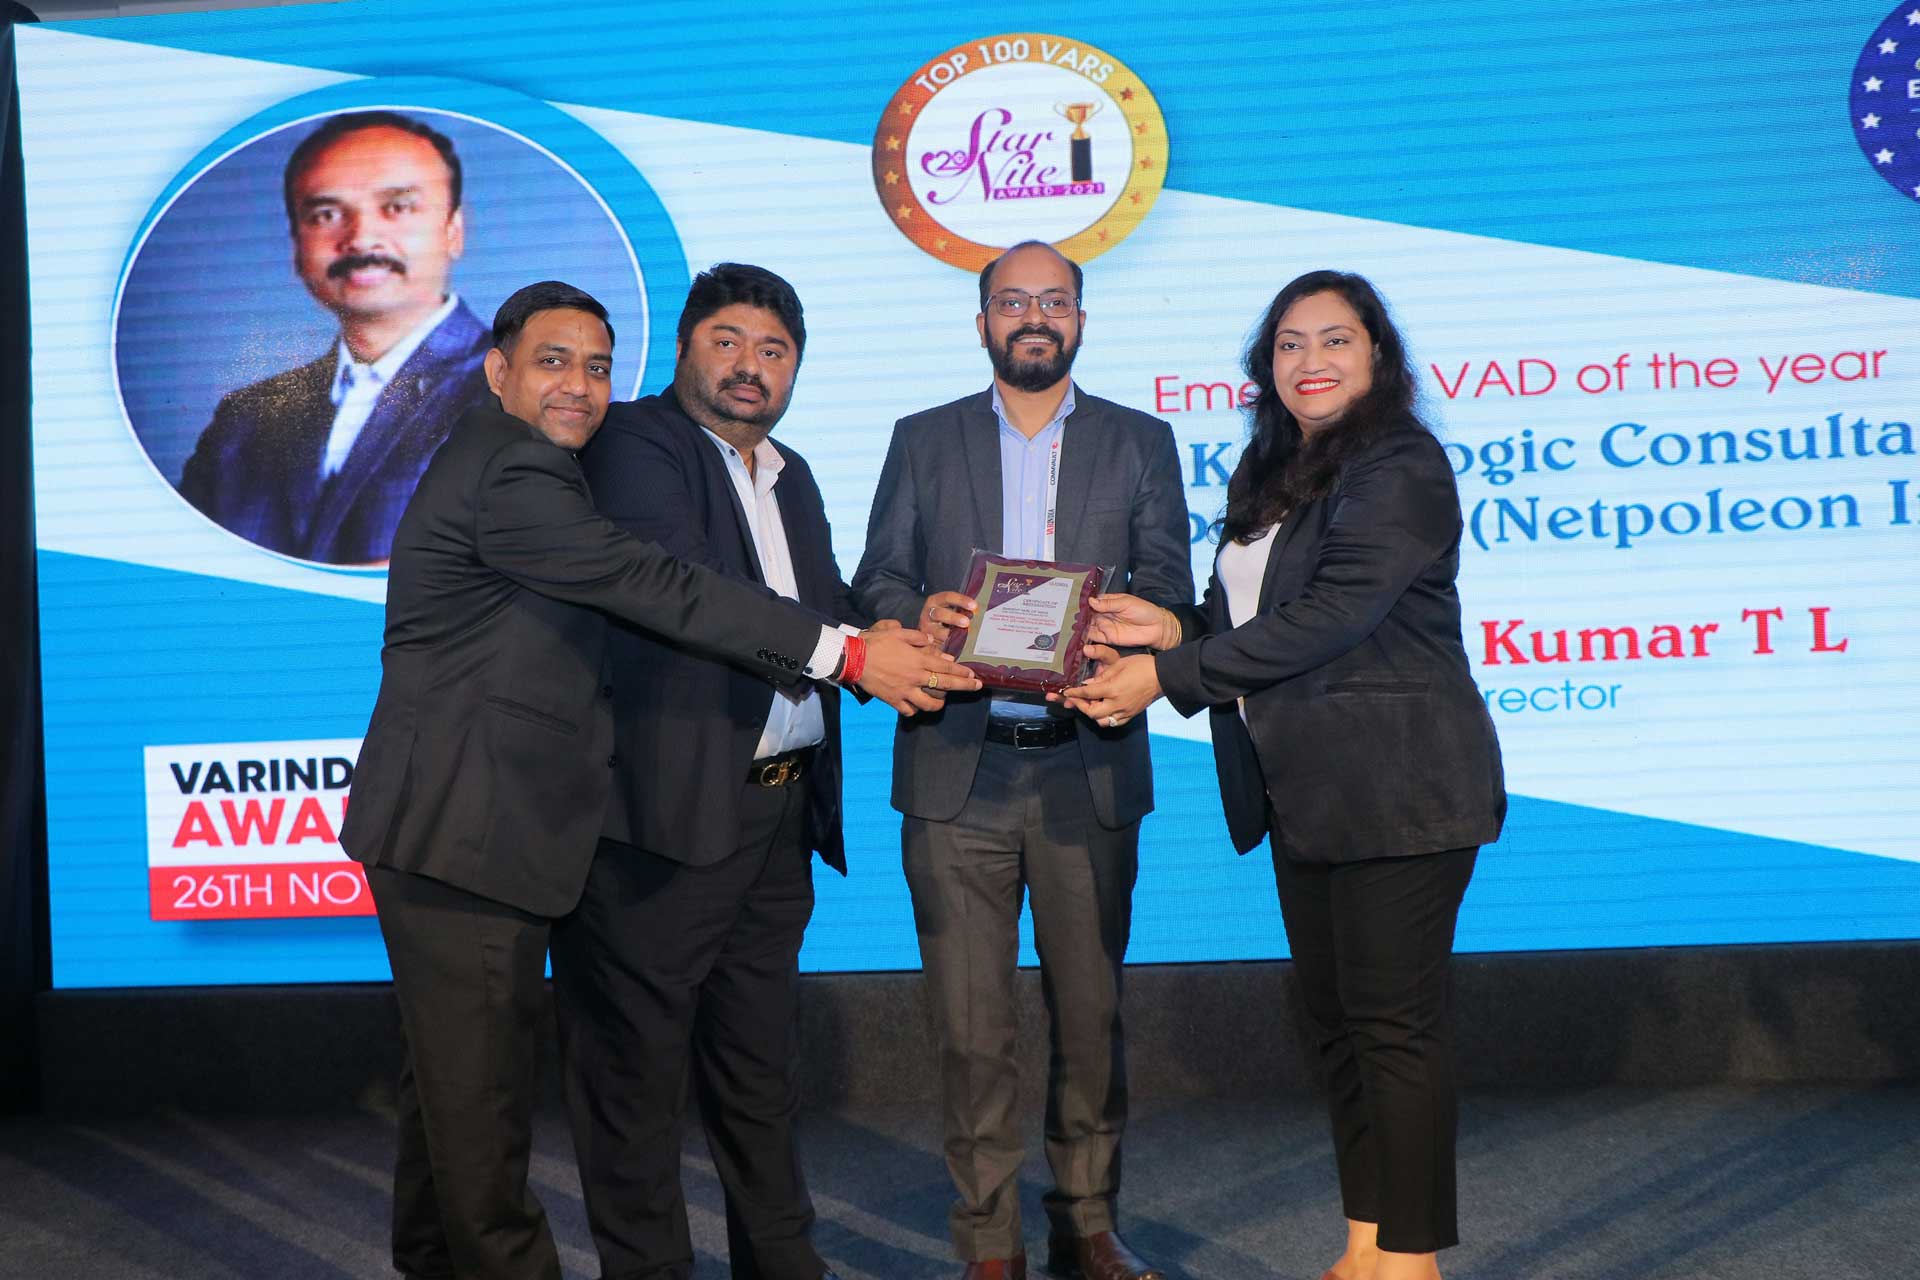 Emerging VADs Of the Year  Award goes to TechKnowLogic Consultants India Private Limited (Netpoleon India) at 20th Star Nite Awards 2021